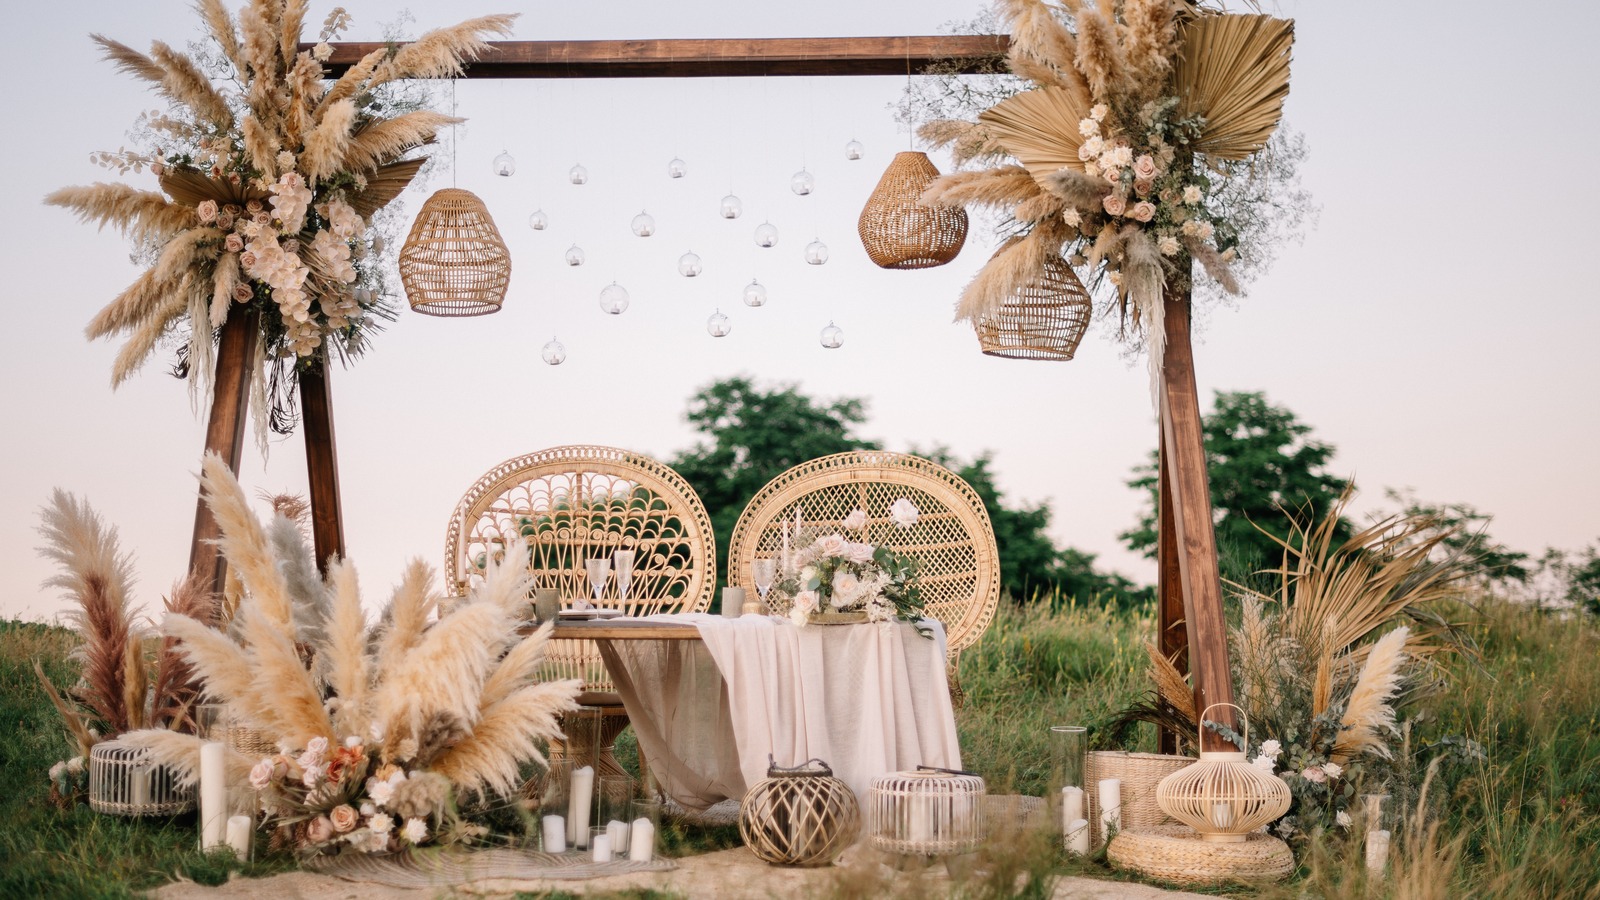 Wedding Decor You Can Reuse After The Big Day